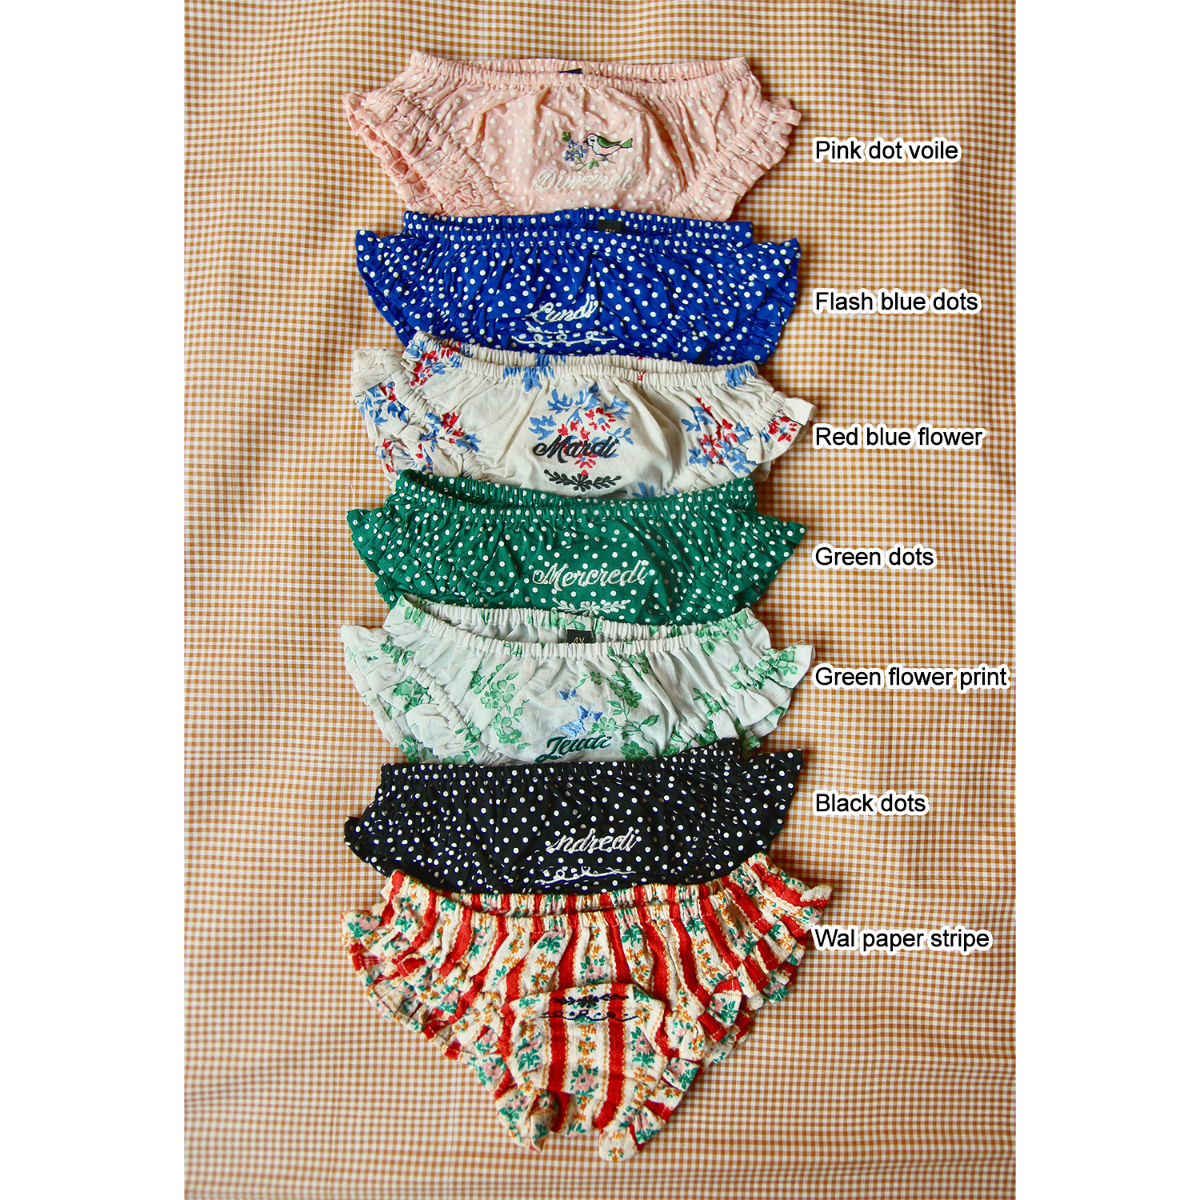 embroidered panties(Wall paper stripe)